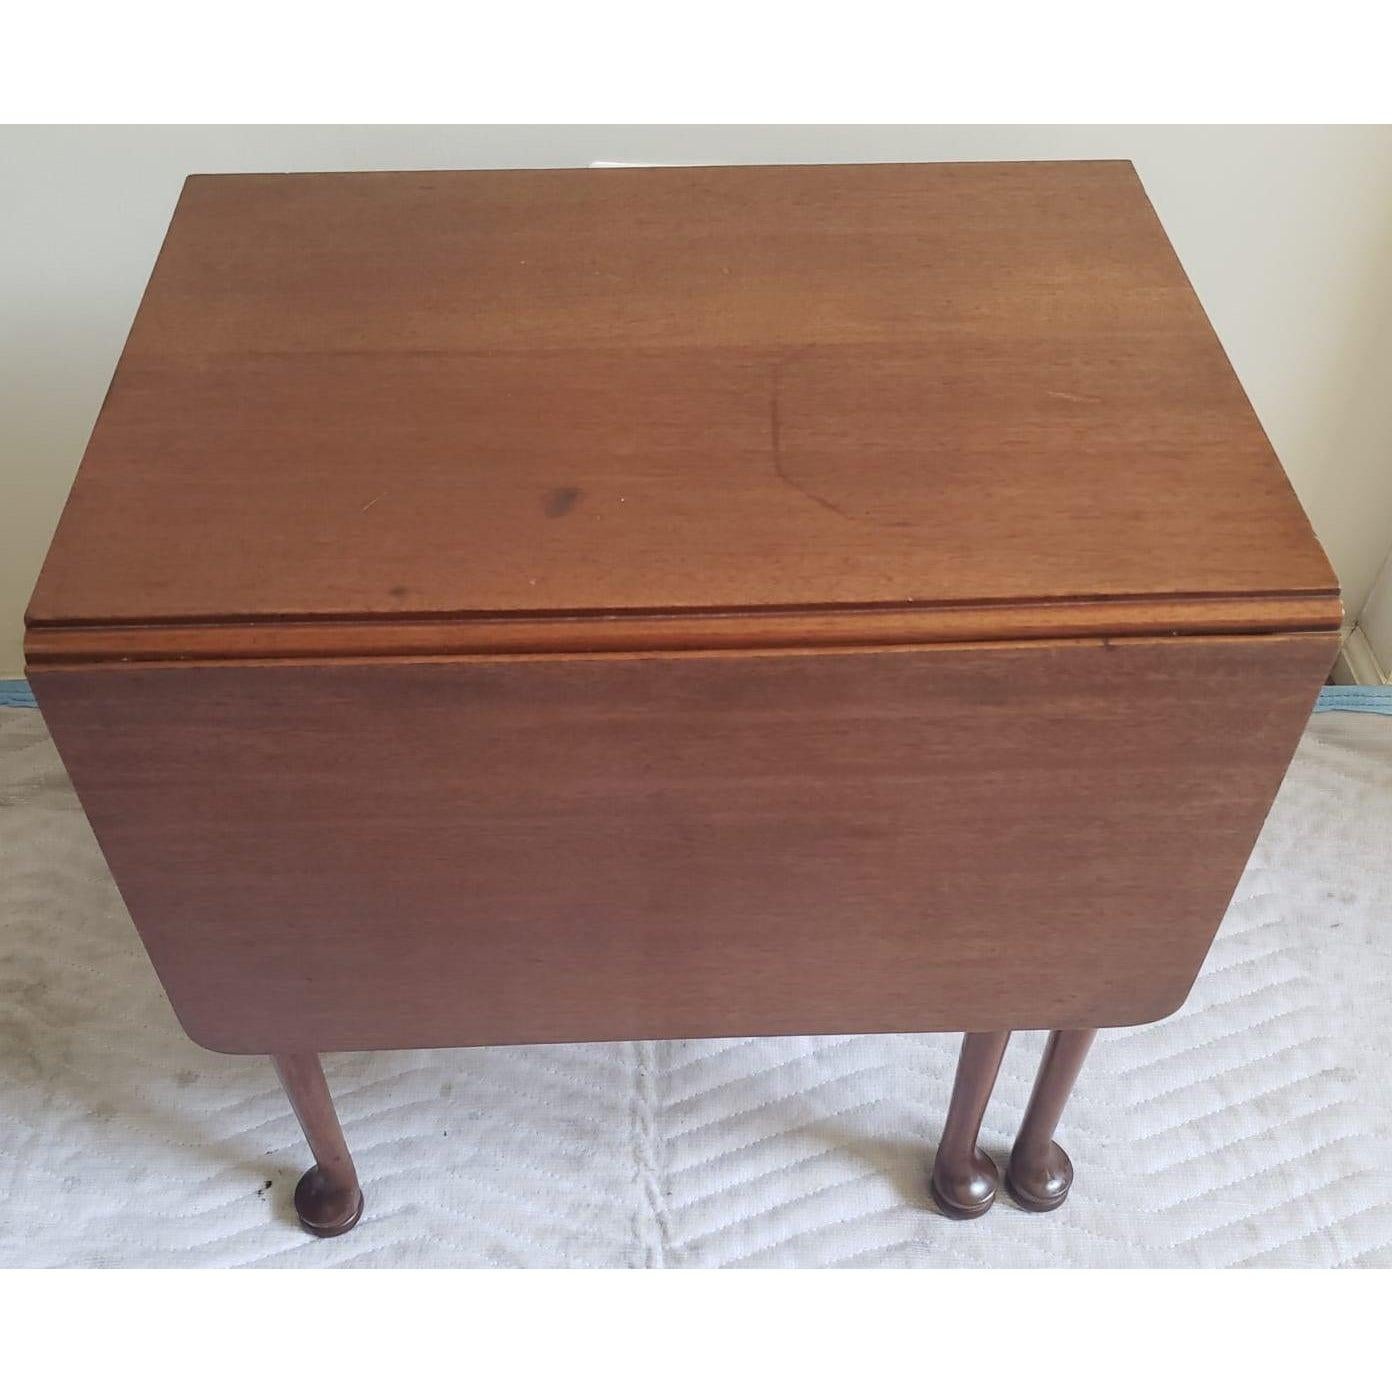 Biggs Kittinger Chippendale Mahogany Drop Leaf Table In Good Condition For Sale In Germantown, MD